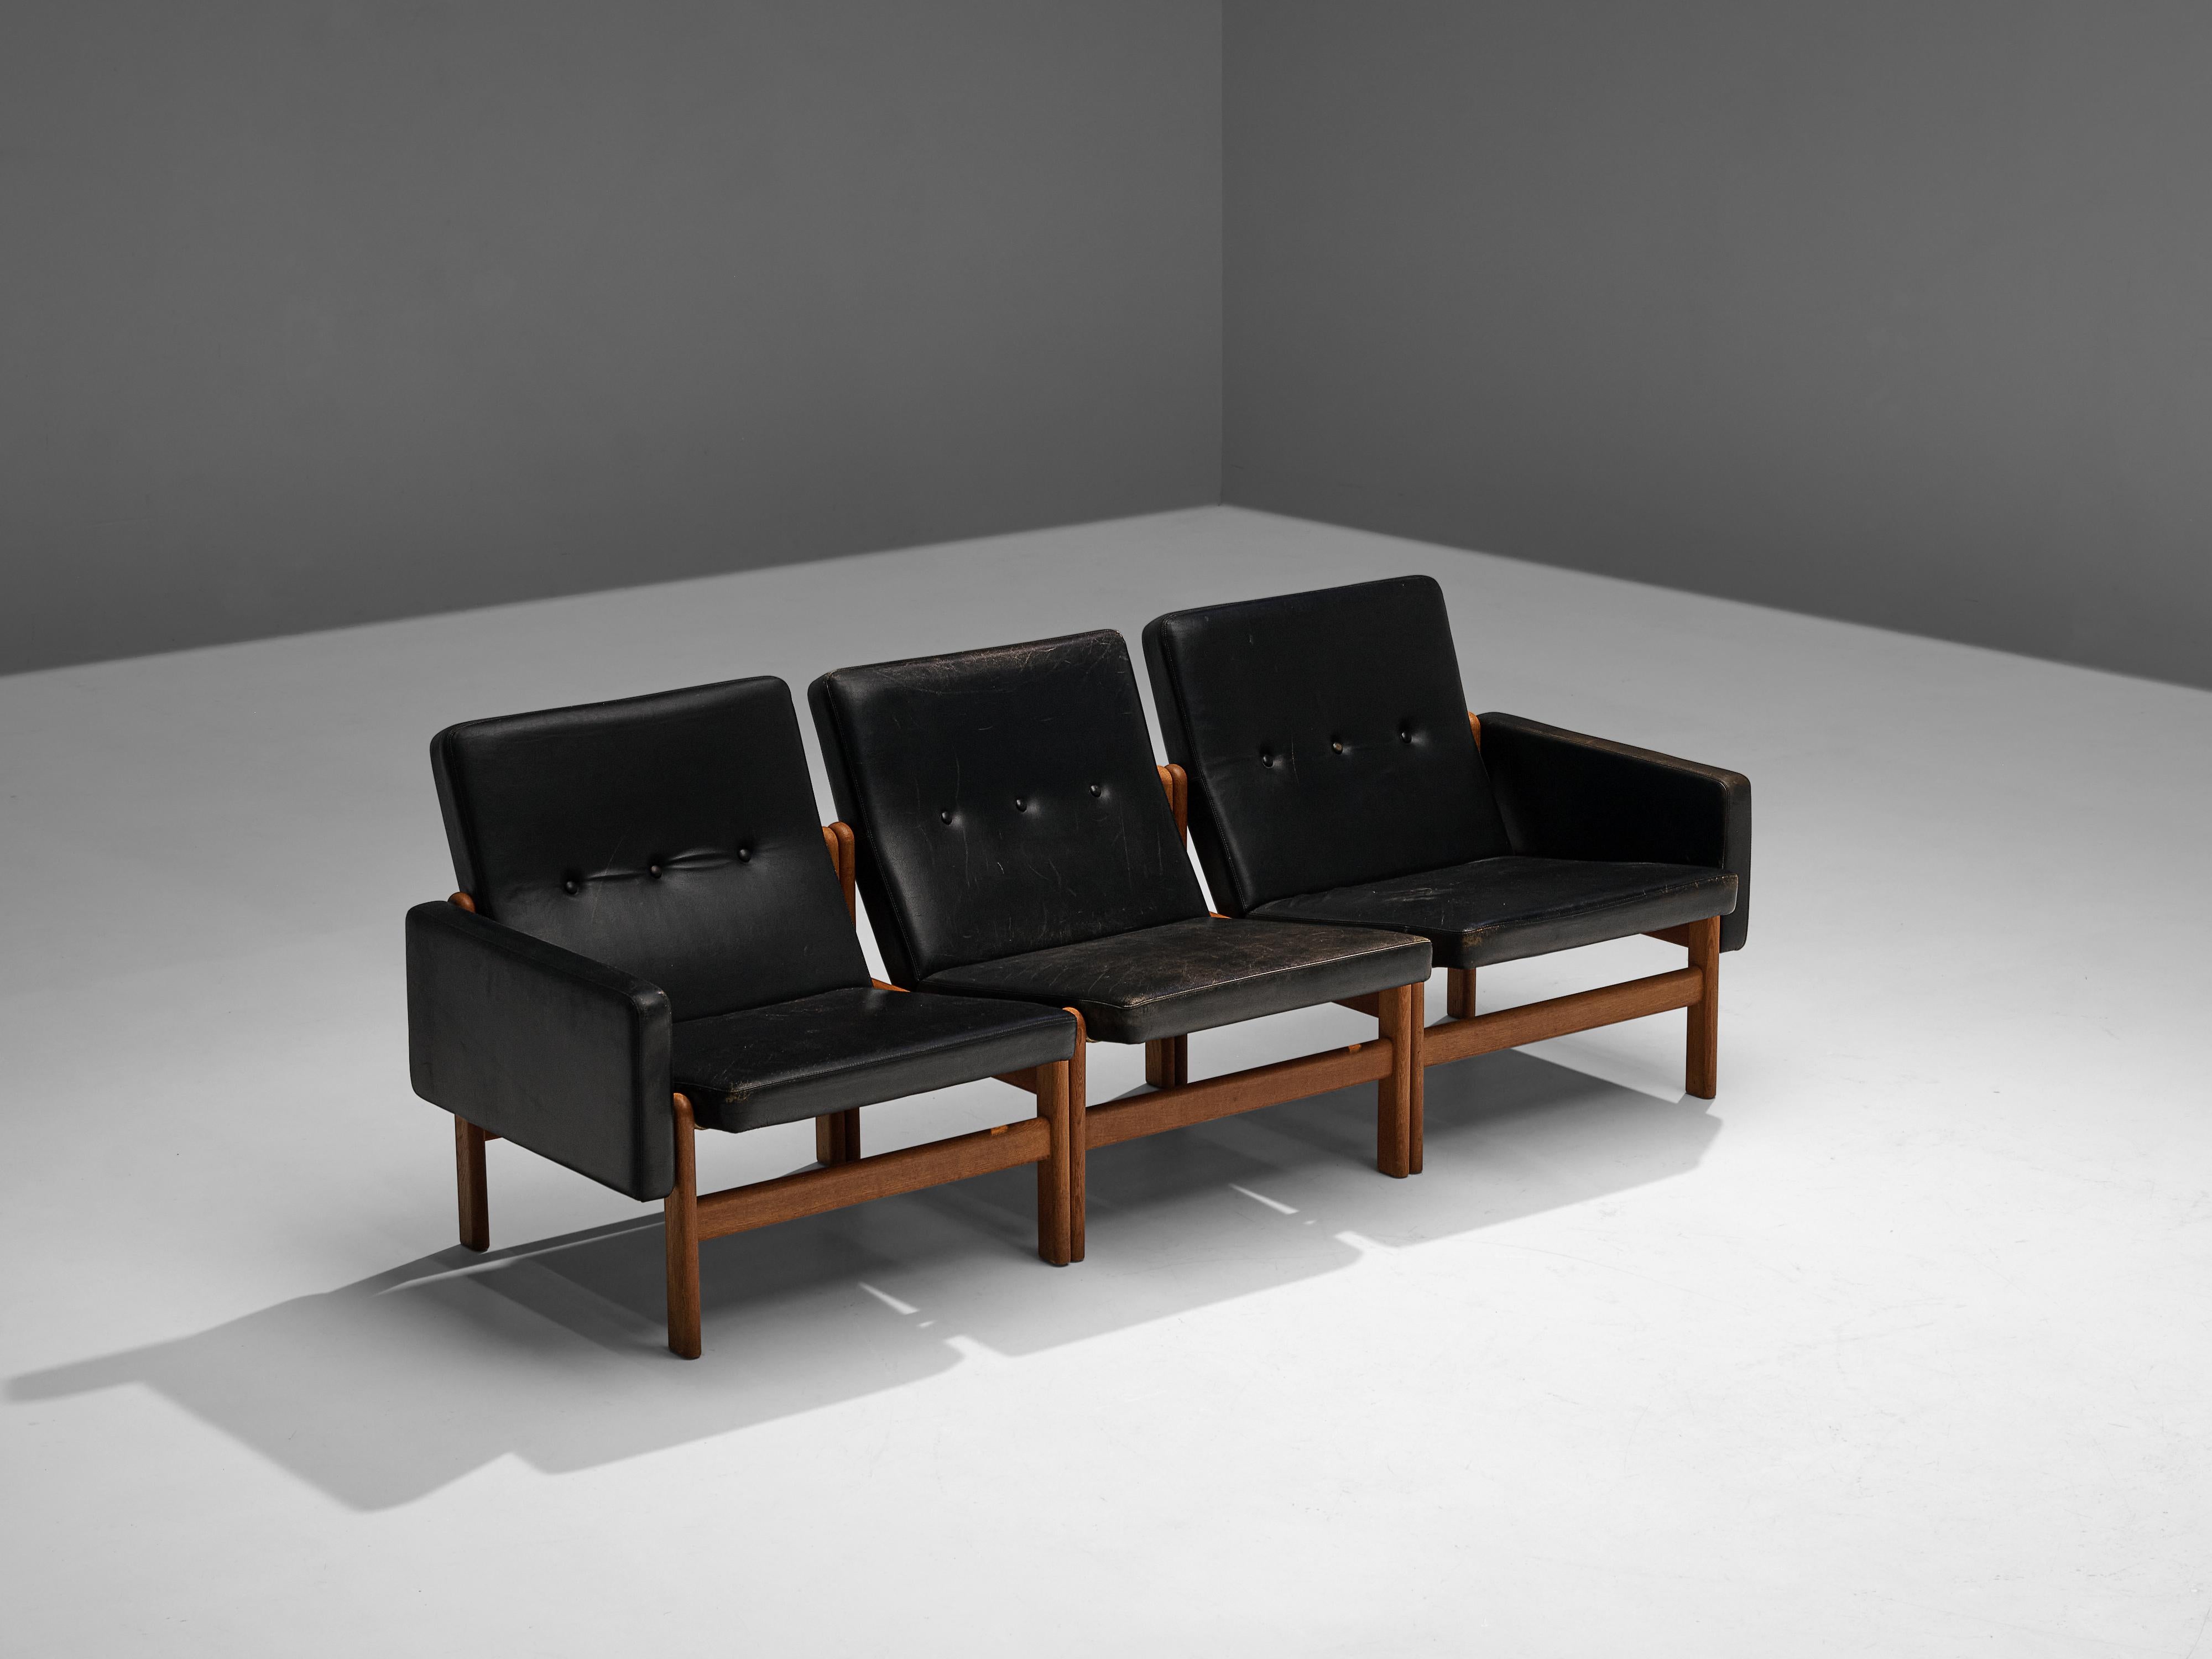 Jørgen Bækmark for FDB Møbler, modular sofa, teak and leather, Denmark, 1960s

Modular sofa designed by Jørgen Bækmark for FDB Møbler in the 1960s. This modular sofa consists of three pieces, one seating and two seatings with an armrest. Overall, it